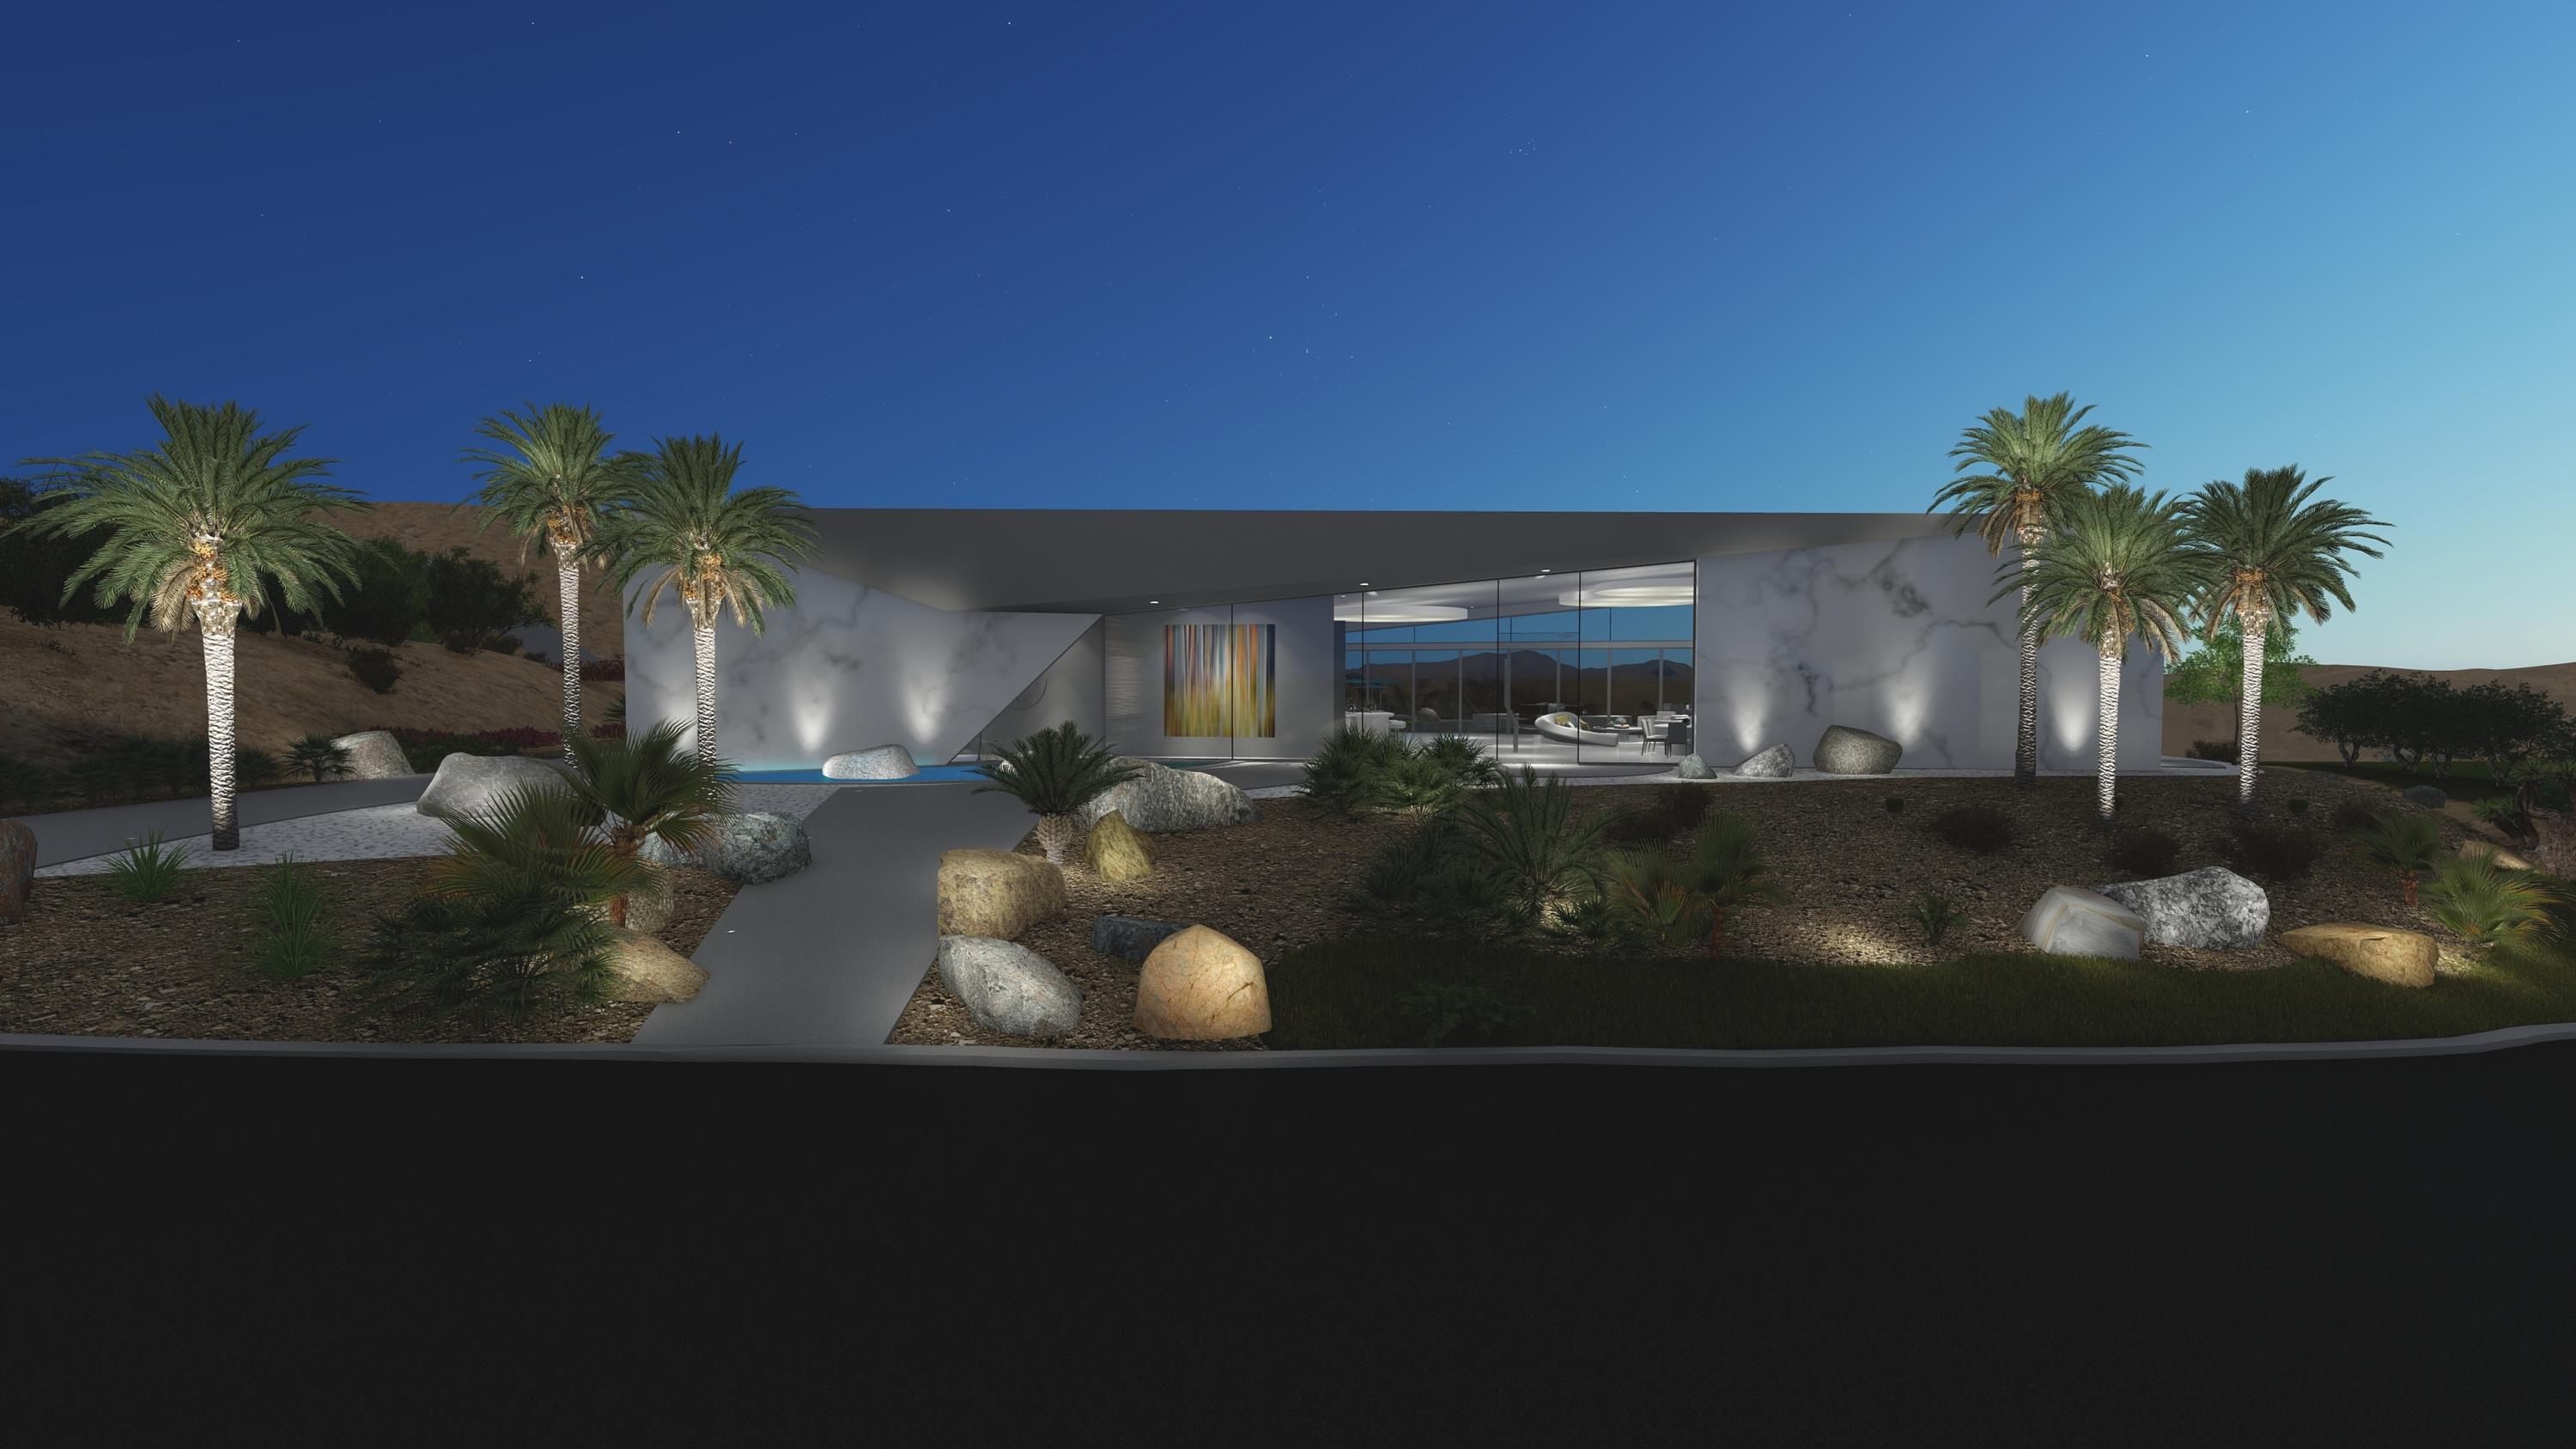 Pre-Construction Offering - Enjoy  Mirada Estates & Ritz Carlton experience in this Ultra Contemporary, architecturally significant home by Brian Foster.  On a private ''king sized'' lot over 3/4 acres with incredible front row views of the city and San Jacinto mountains.  Offering walls of glass, pocket sliding doors, fire features, water feature, pool, spa and much more.  Main home offers 3 bedrooms/3.5 baths, study, lavish master suite, large entertaining areas and 3 car garage.  Detached guest house offers 2 bedrooms, 2 baths in 1200 square feet with a carport.   Also included are: outdoor kitchen/cabana/dining area, outdoor ZEN lounge area off master bath with double showers, fire feature, daybed & bathtub.  Exclusive access agreement for the Ritz Carlton.  You easily live the Five Star resort lifestyle with in-home dining, restaurants, spa, gym, pools & more at discounted rates. No membership fees.  Your guests can also stay at the Ritz Carlton.  Mirada is the most private enclave of custom homes with unmatched security and 24-hour patrol.